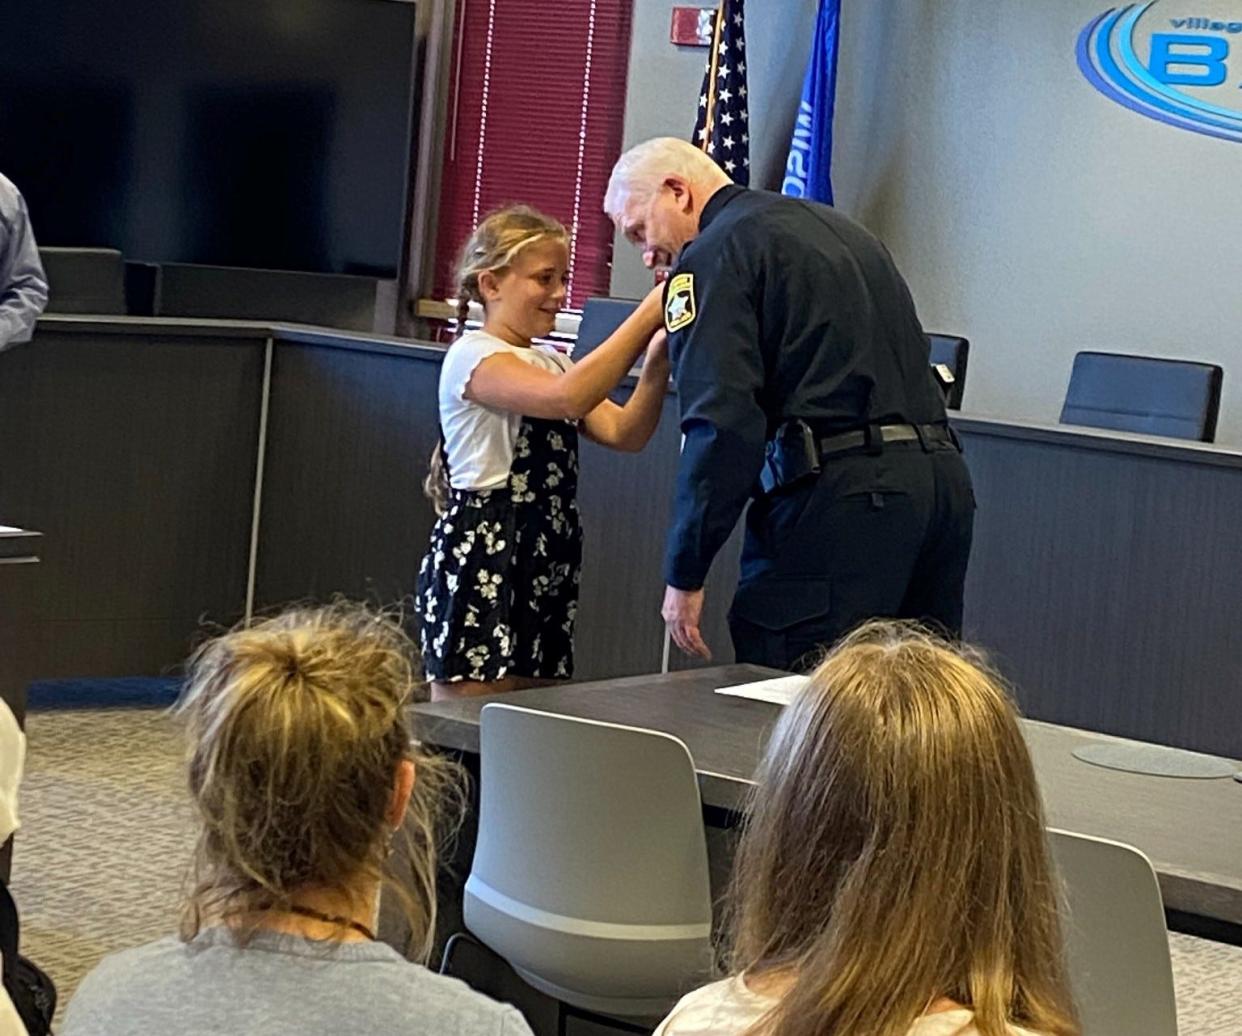 Tom Liebenthal is now the police chief for the village of Bayside Police Department. Former Chief Douglas Larsson administered the oath of office, and Liebenthal's daughter Kennedy pinned on his chief badge during the ceremony.